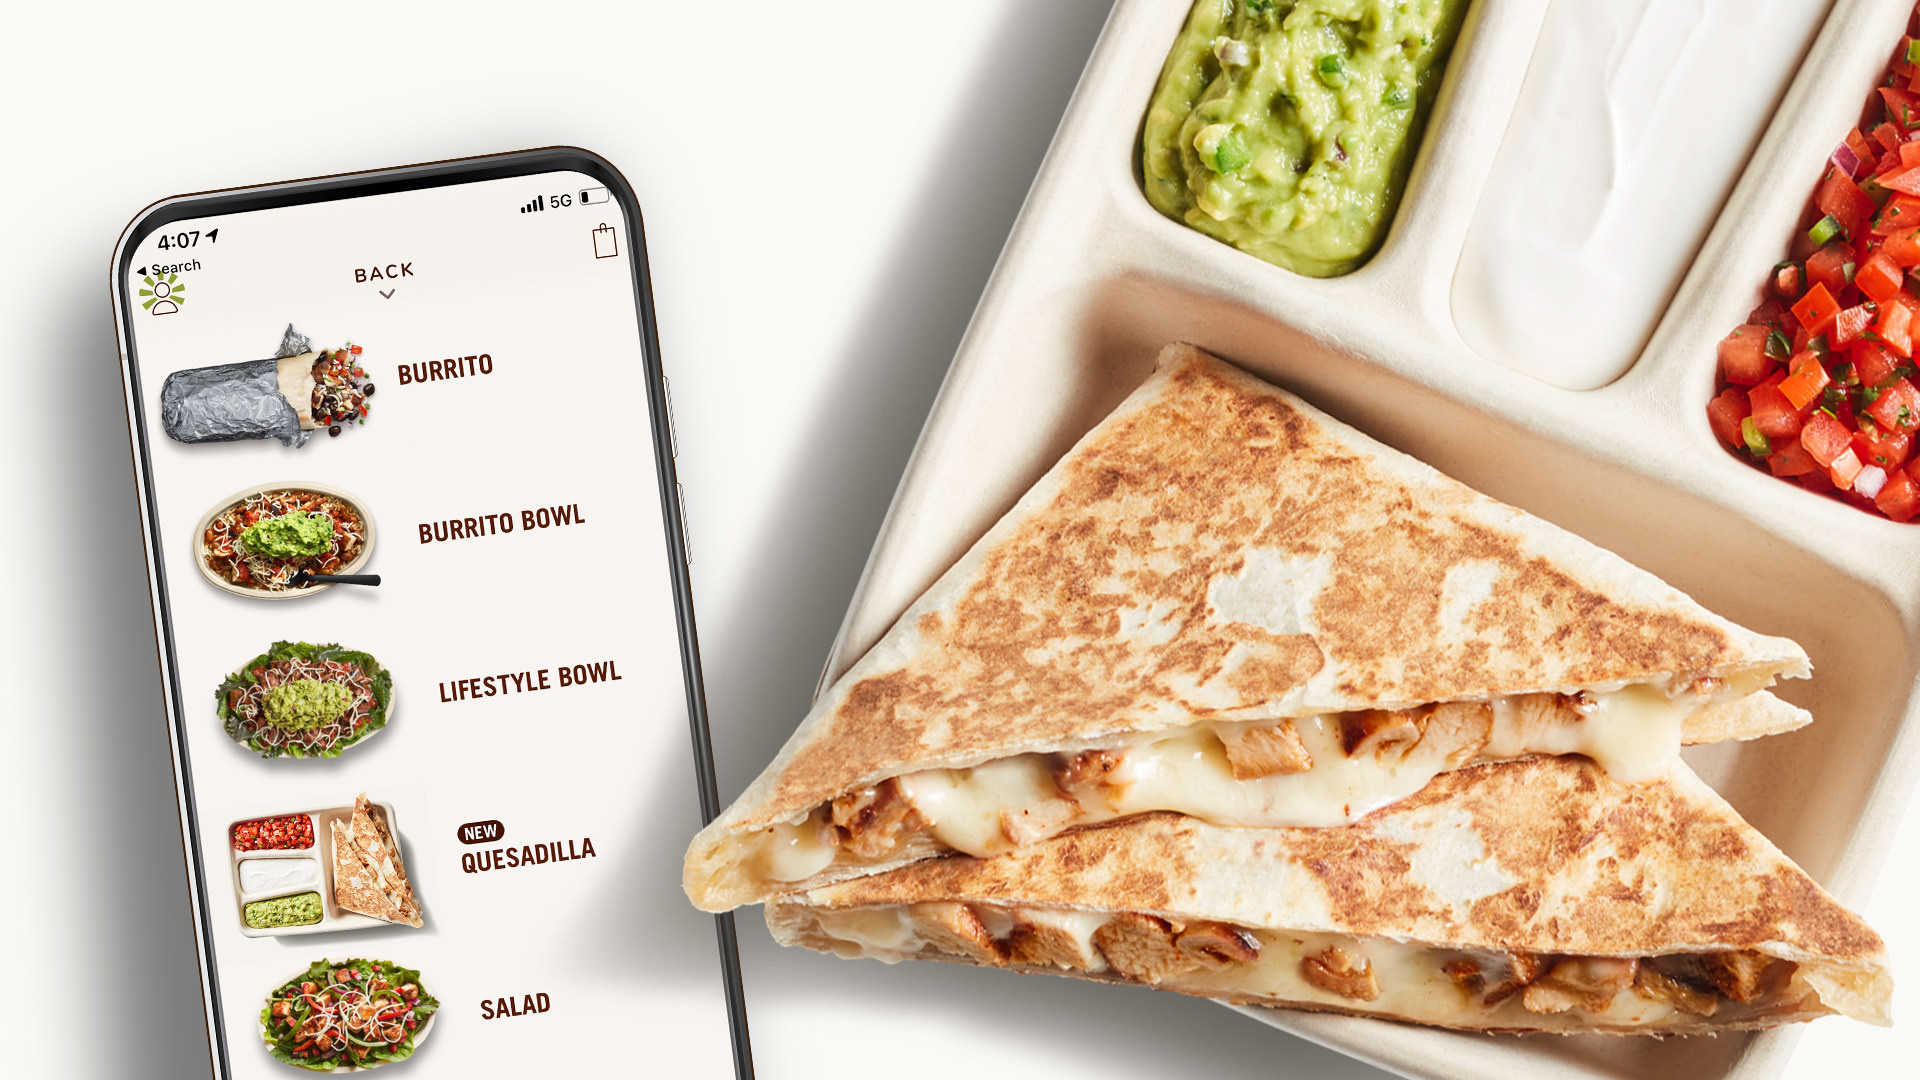 Chipotle: Chipotle's menu, An American chain of fast casual restaurants, Mexican flavor. 1920x1080 Full HD Background.